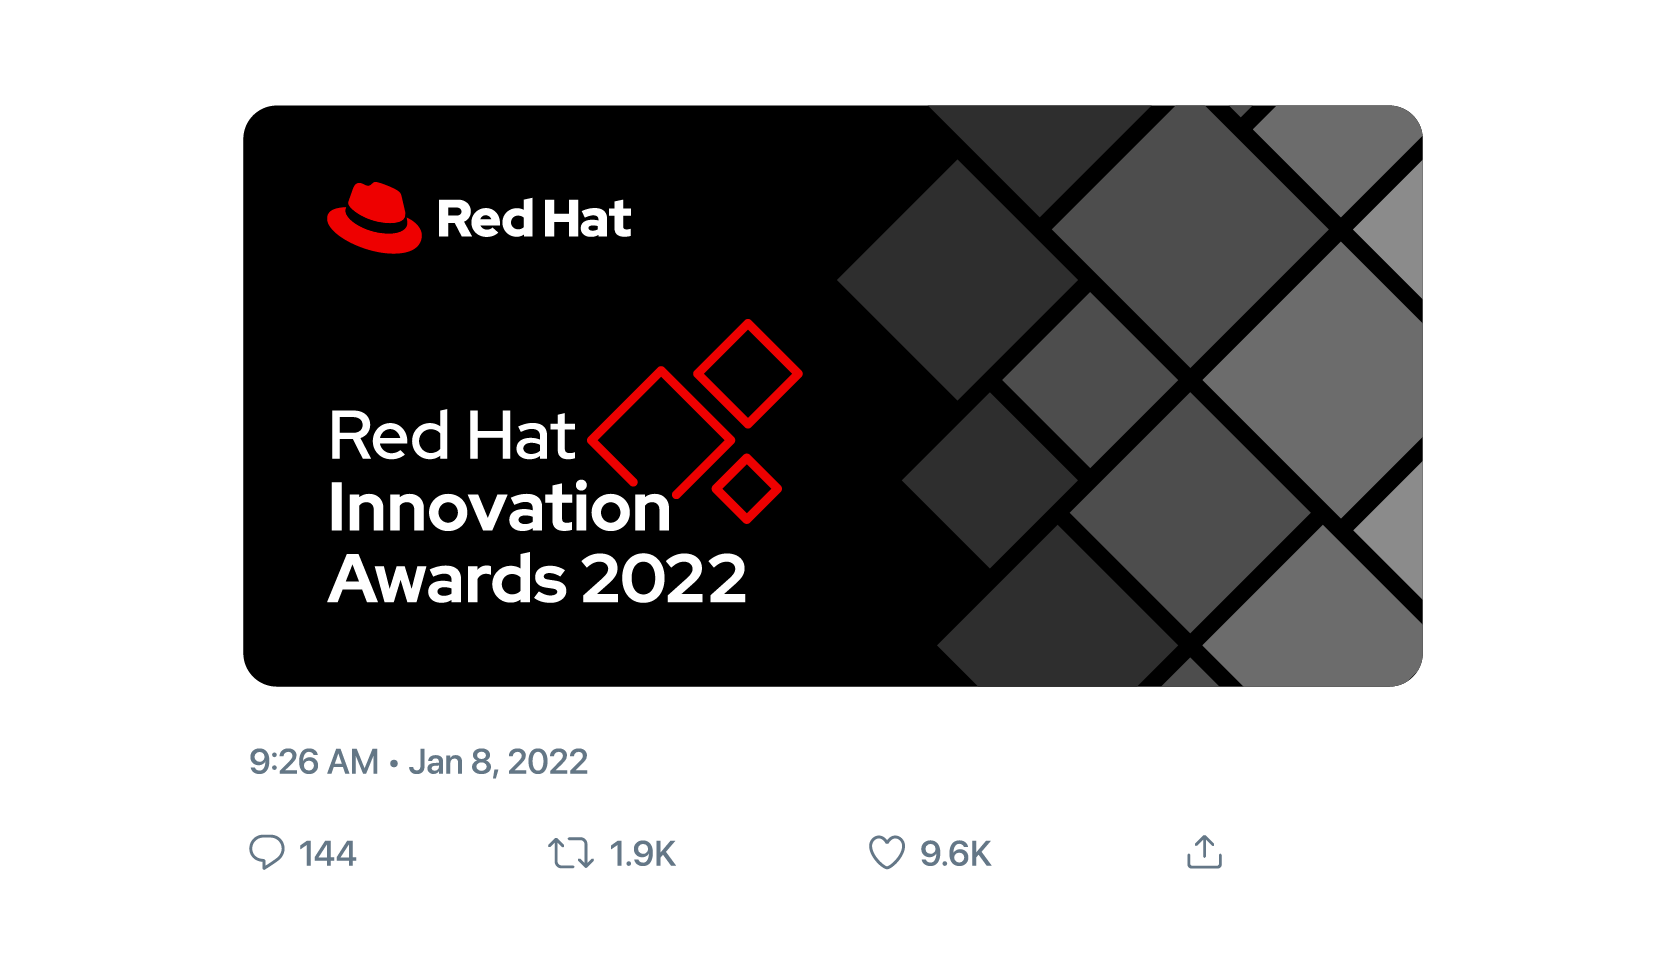 Red Hat Innovation Awards 2022 social media post with the Red Hat logo and a diamond pattern that matches the initiative logo.